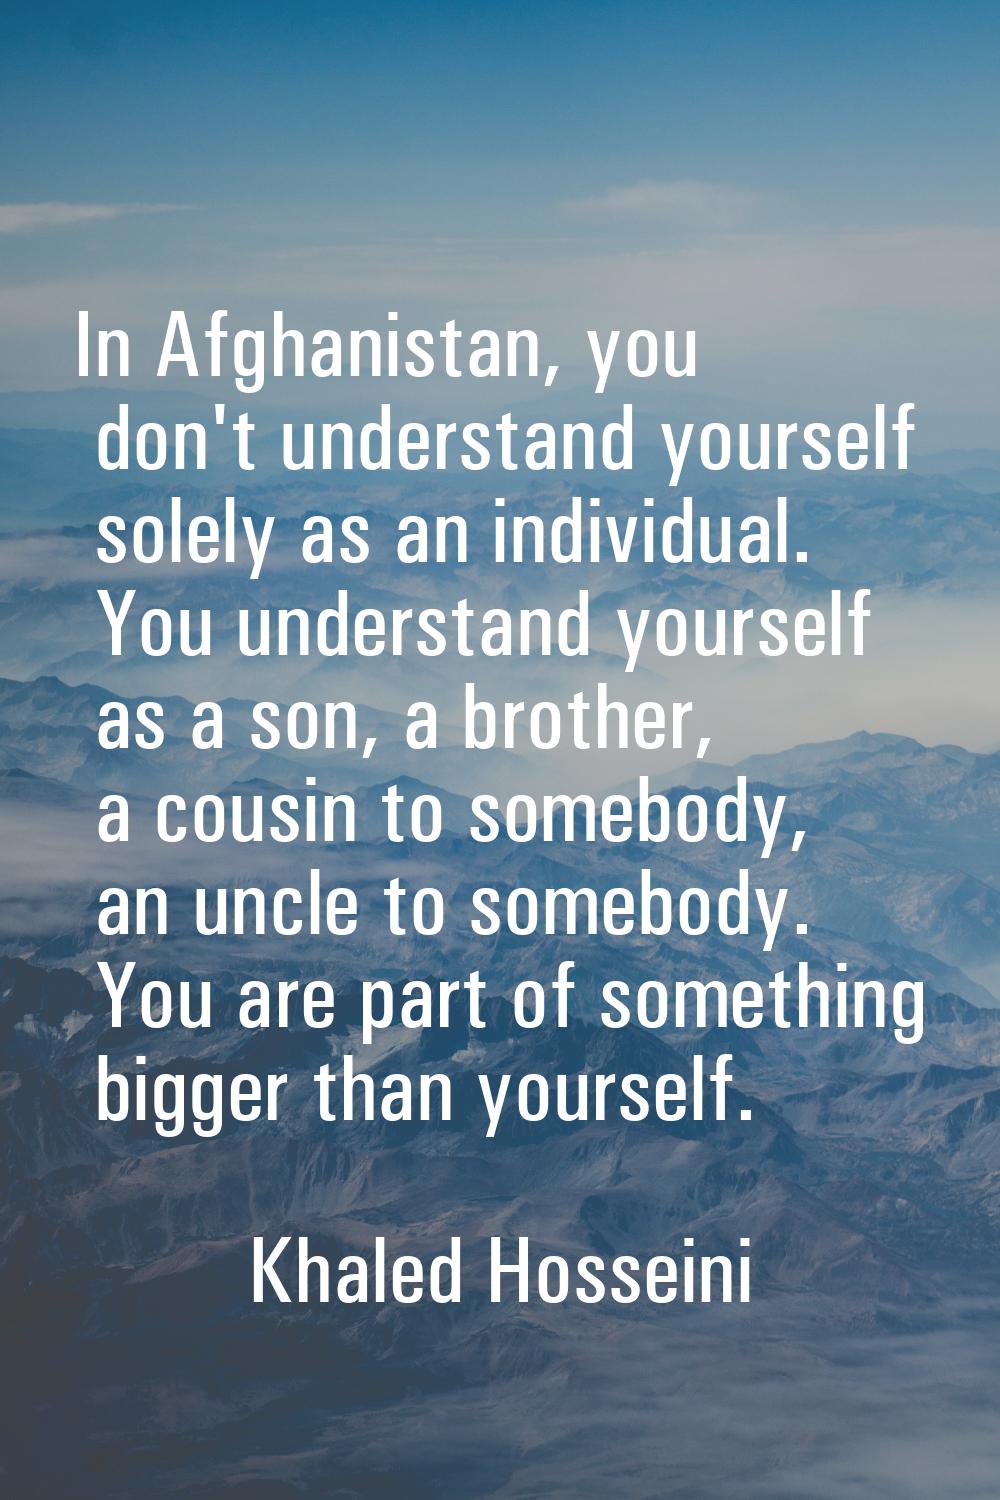 In Afghanistan, you don't understand yourself solely as an individual. You understand yourself as a